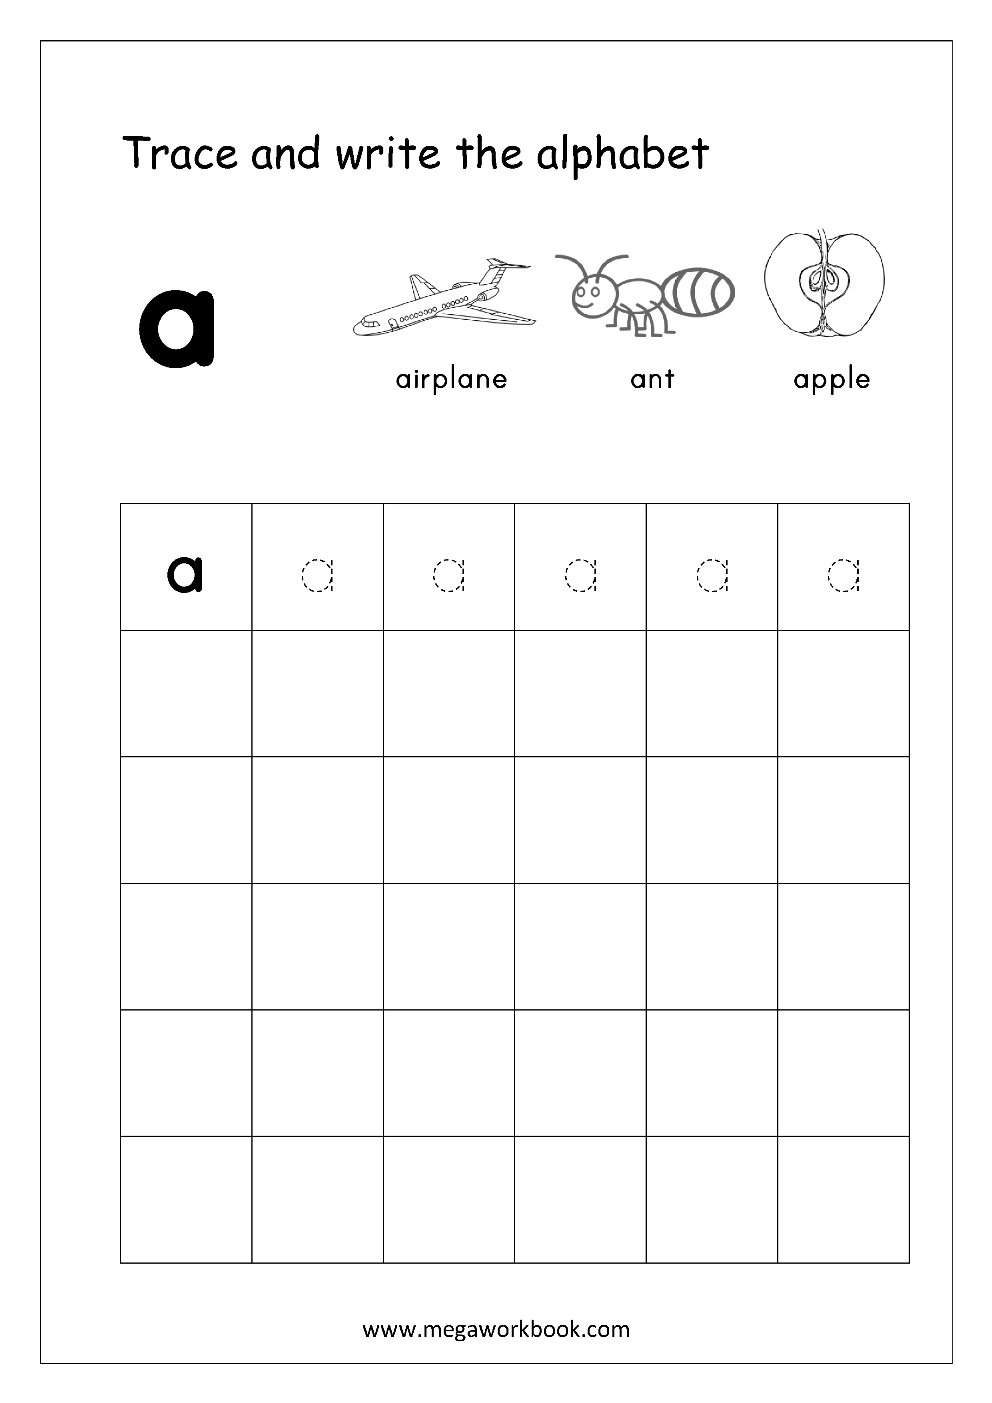 Free English Worksheets - Alphabet Writing (Small Letters throughout Alphabet Tracing Worksheet Small Letters